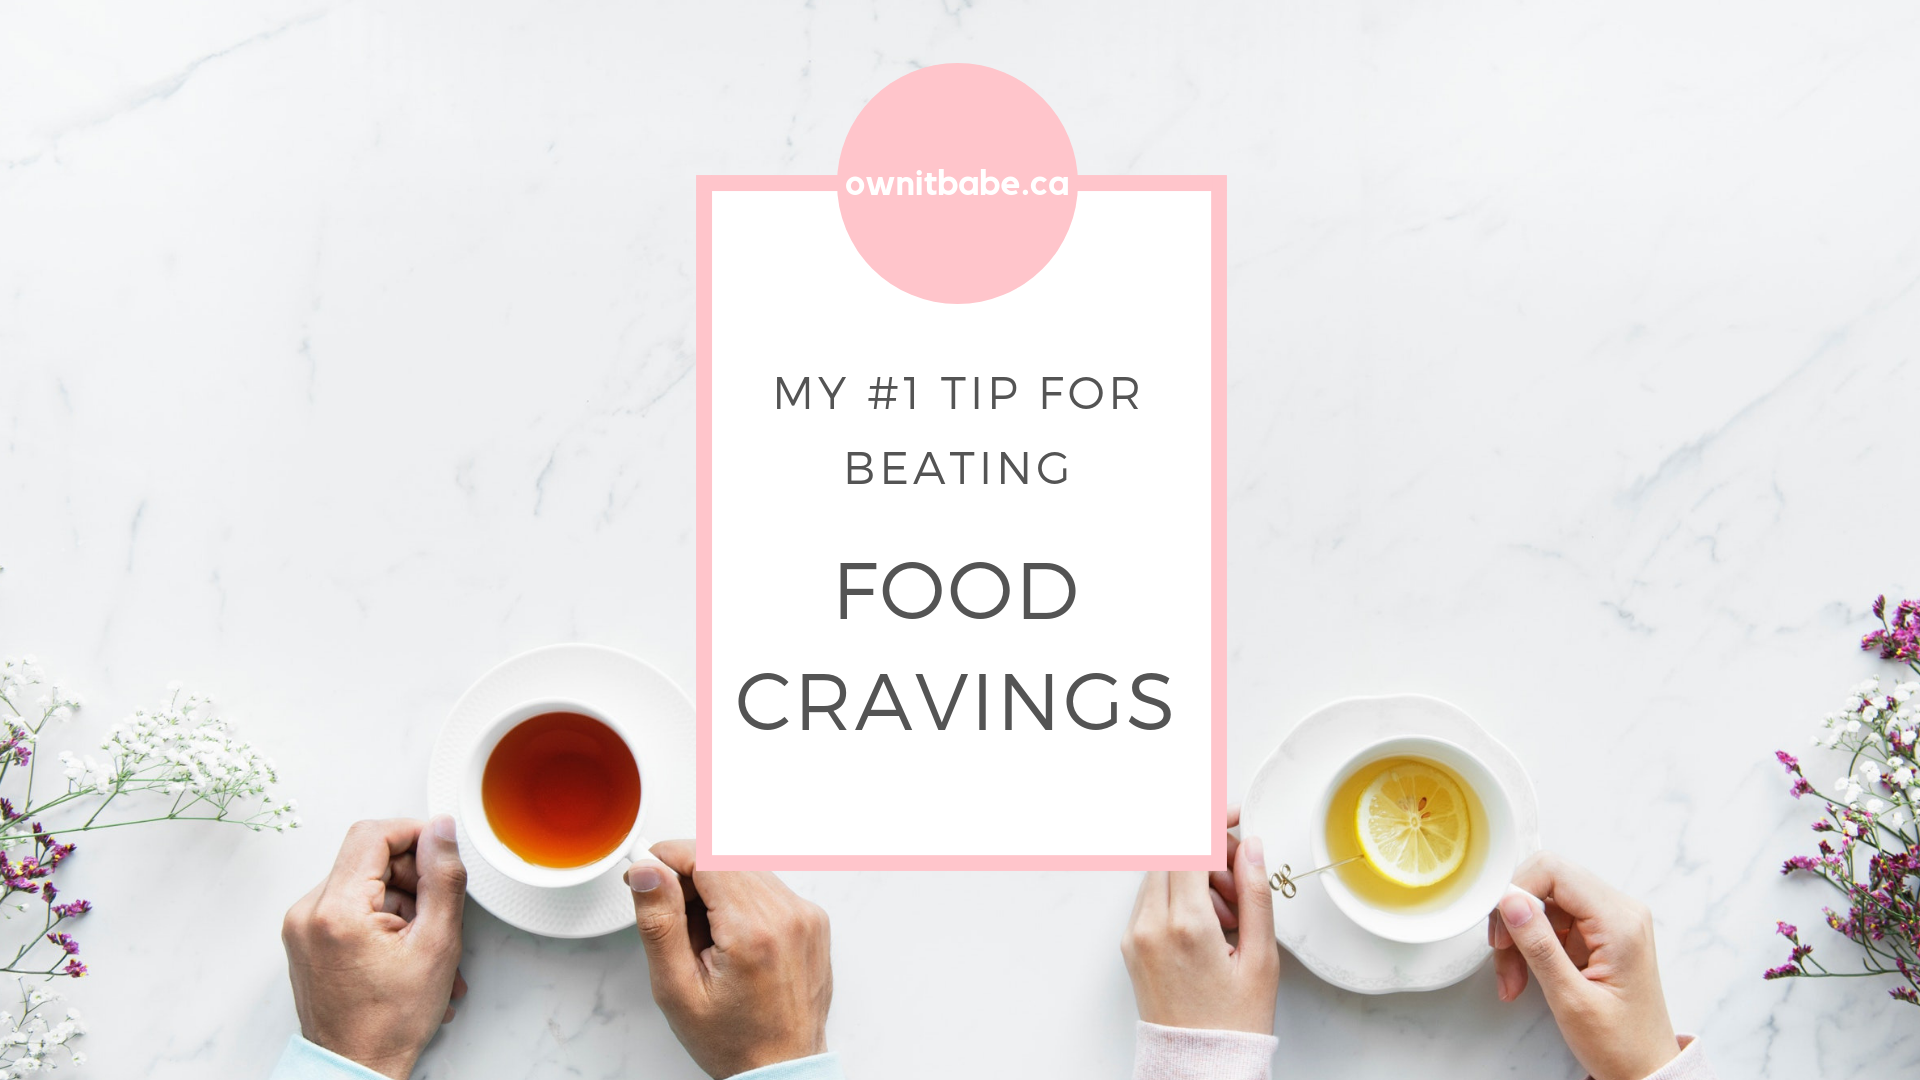 I used to think that I have to avoid eating the foods I crave and gather up enough willpower to eat something "healthier". However, my Number One Tip to beat these food cravings has changed drastically and it really does work. By Rini Frey, ownitbabe.ca #foodcravings #intuitiveeating